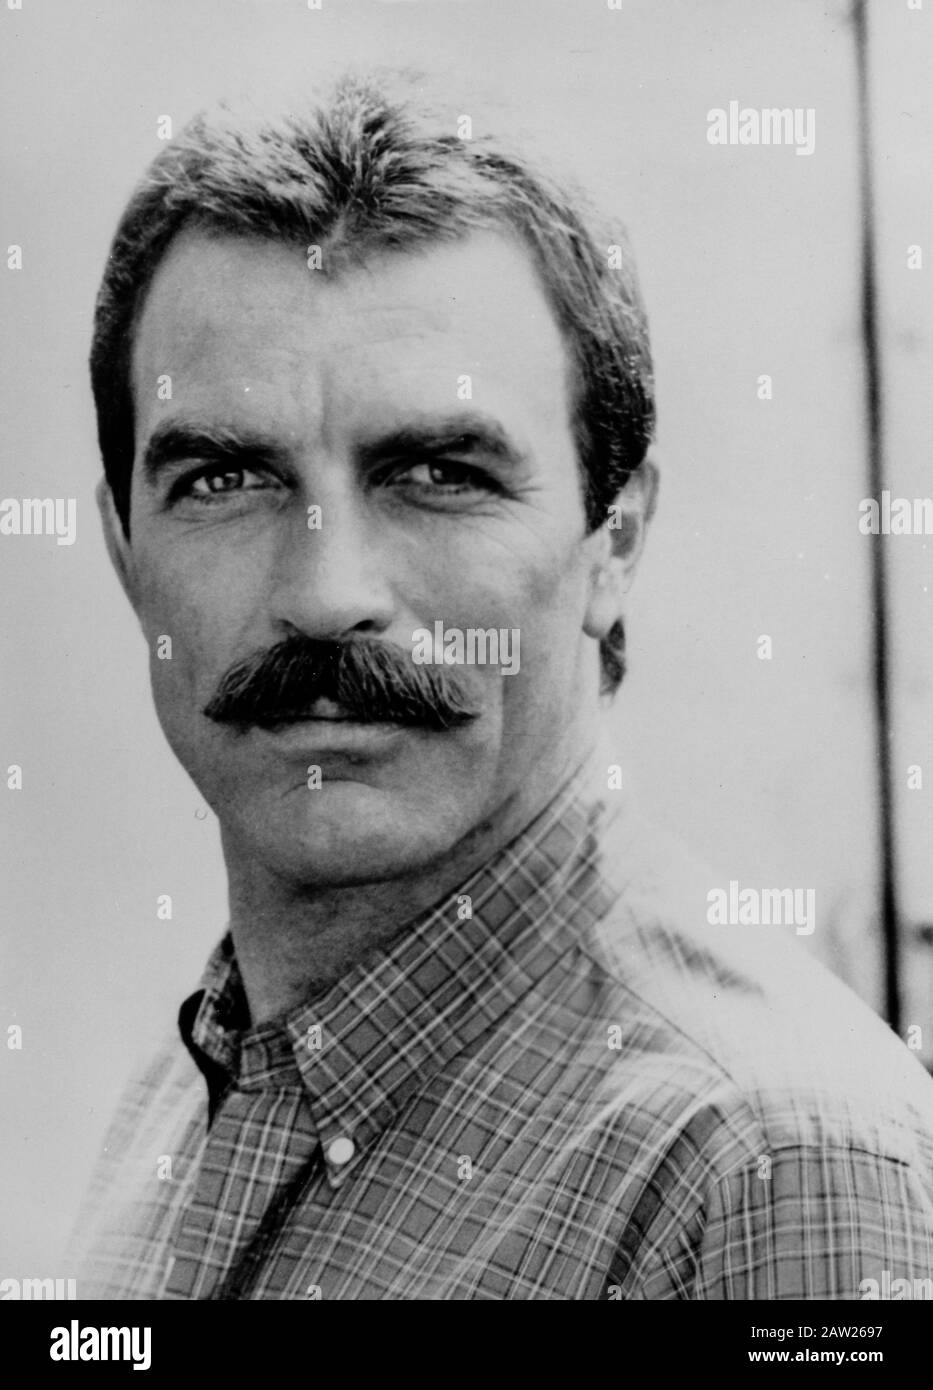 Tom Selleck High Resolution Stock Photography and Images - Alamy